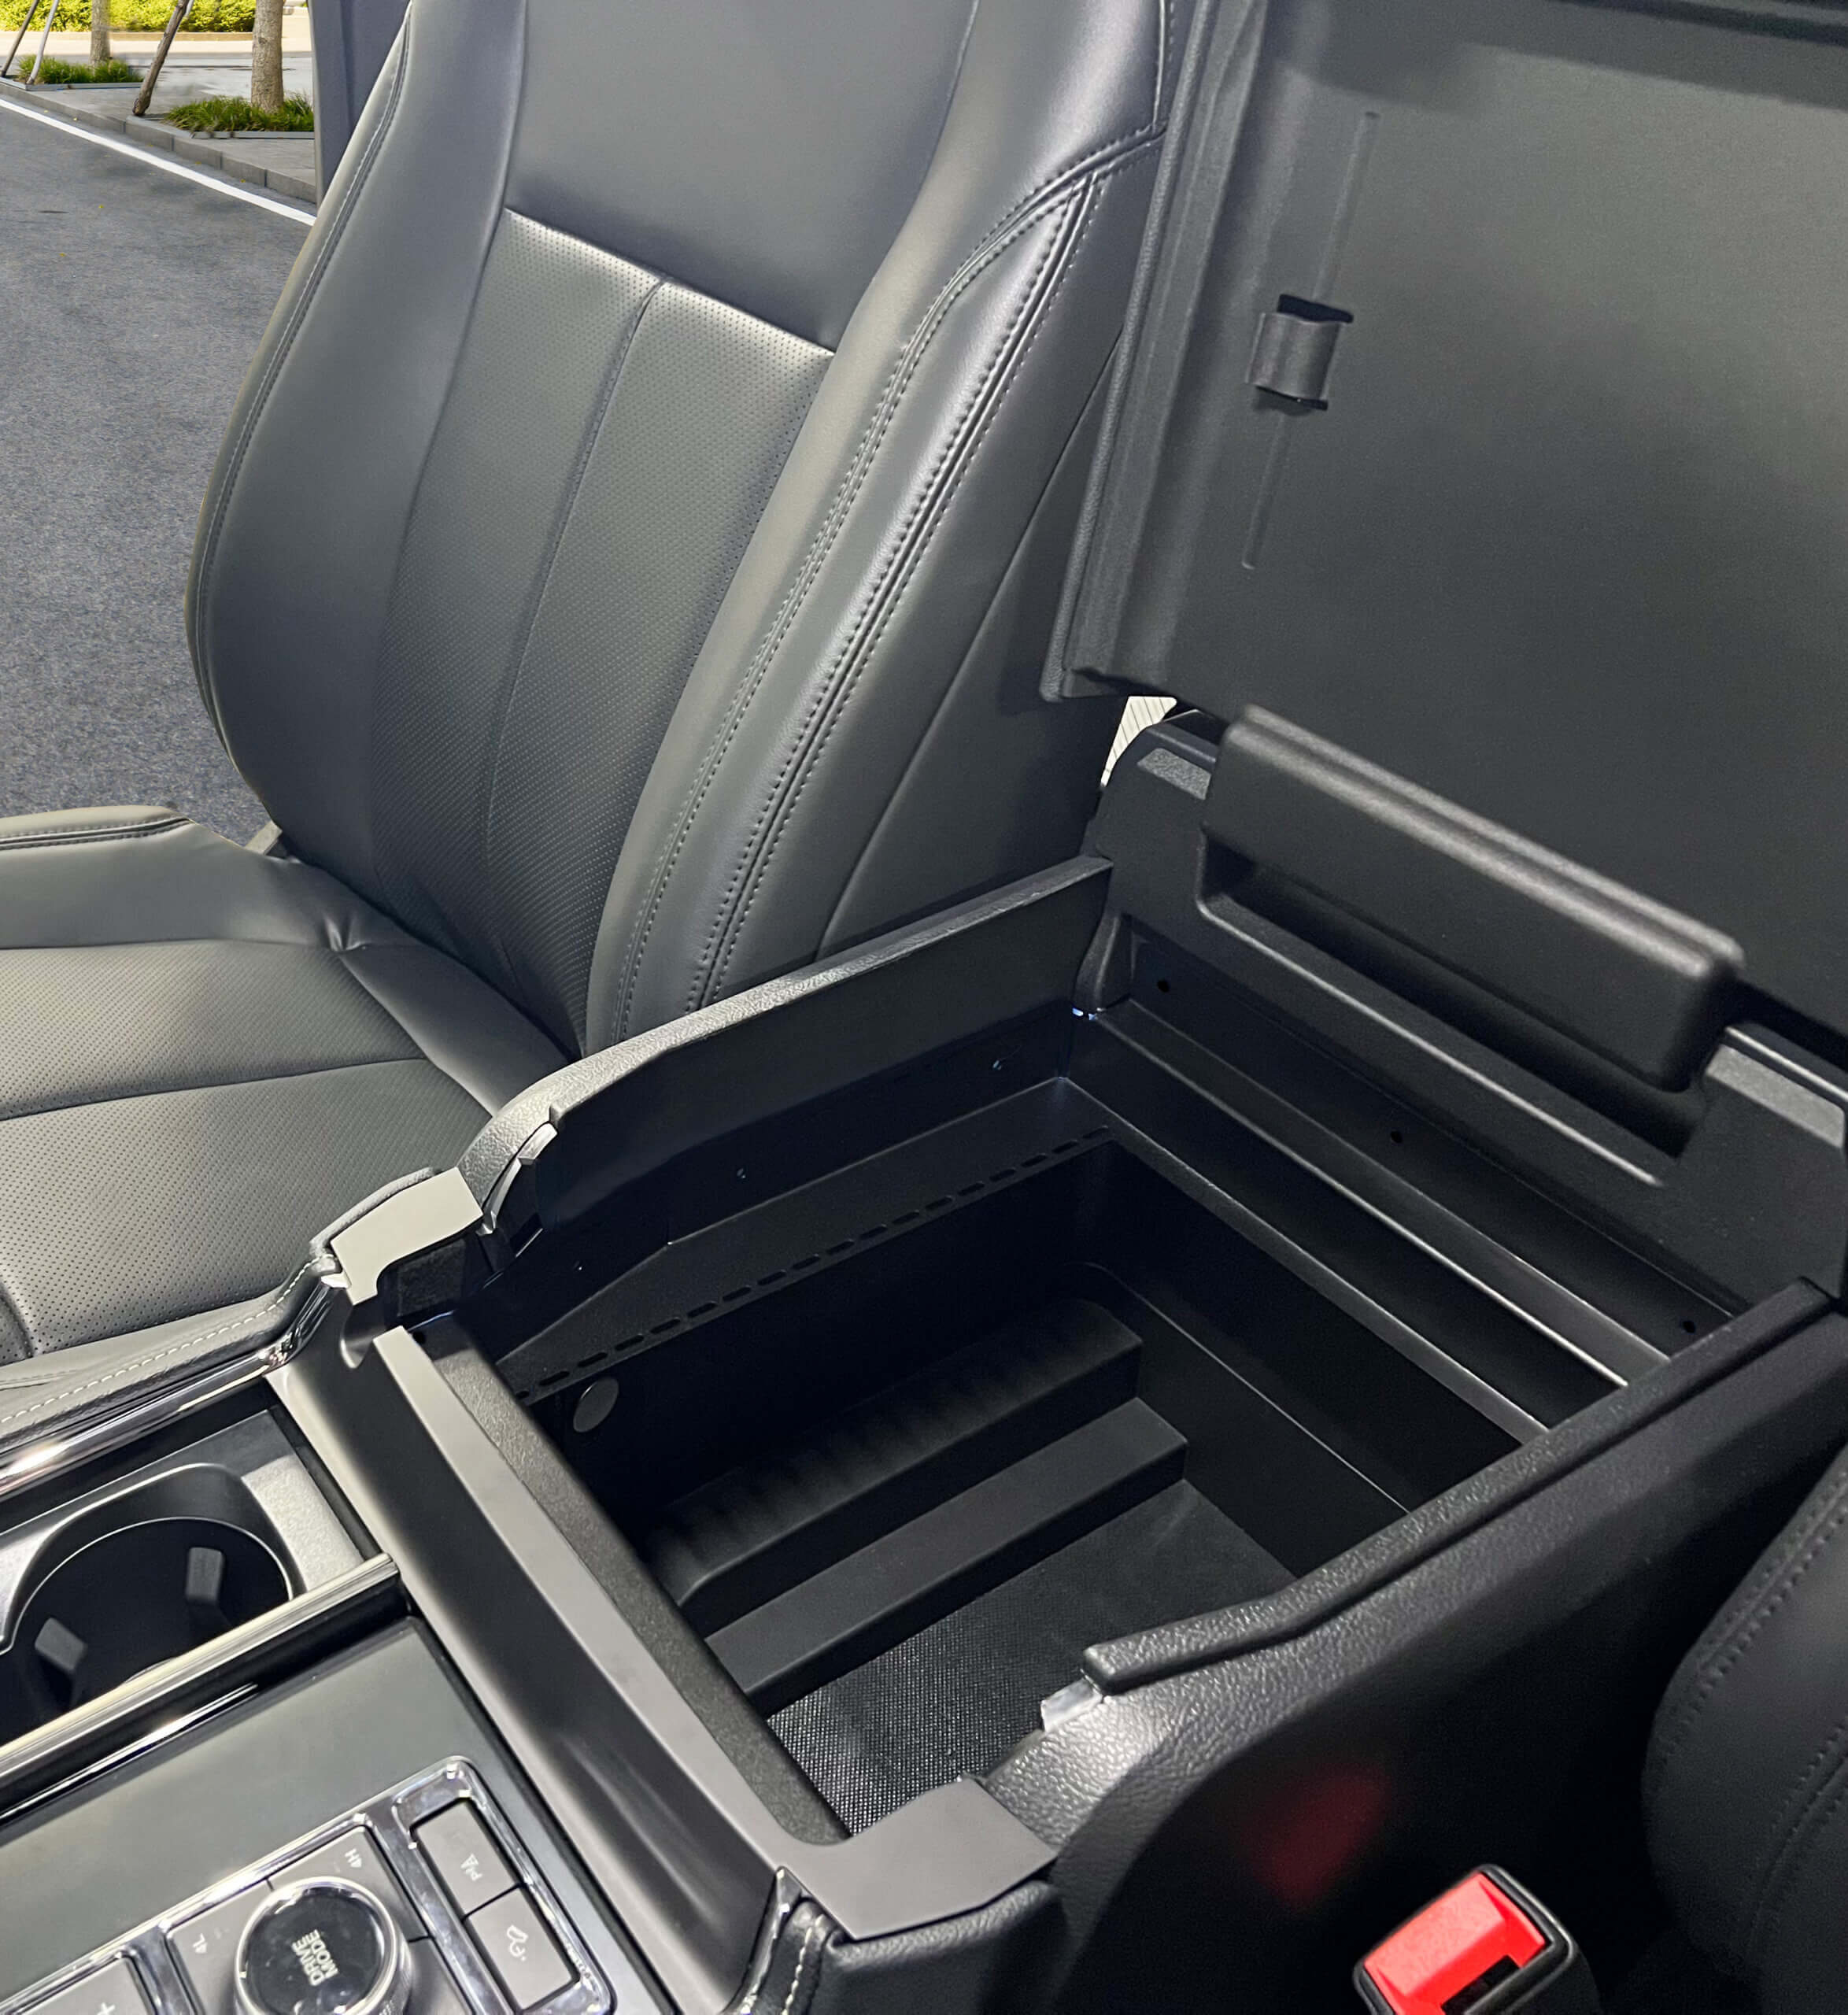 Vehicle-Specific 11″ Drop-In Console for 2023 Retail Ford Expedition